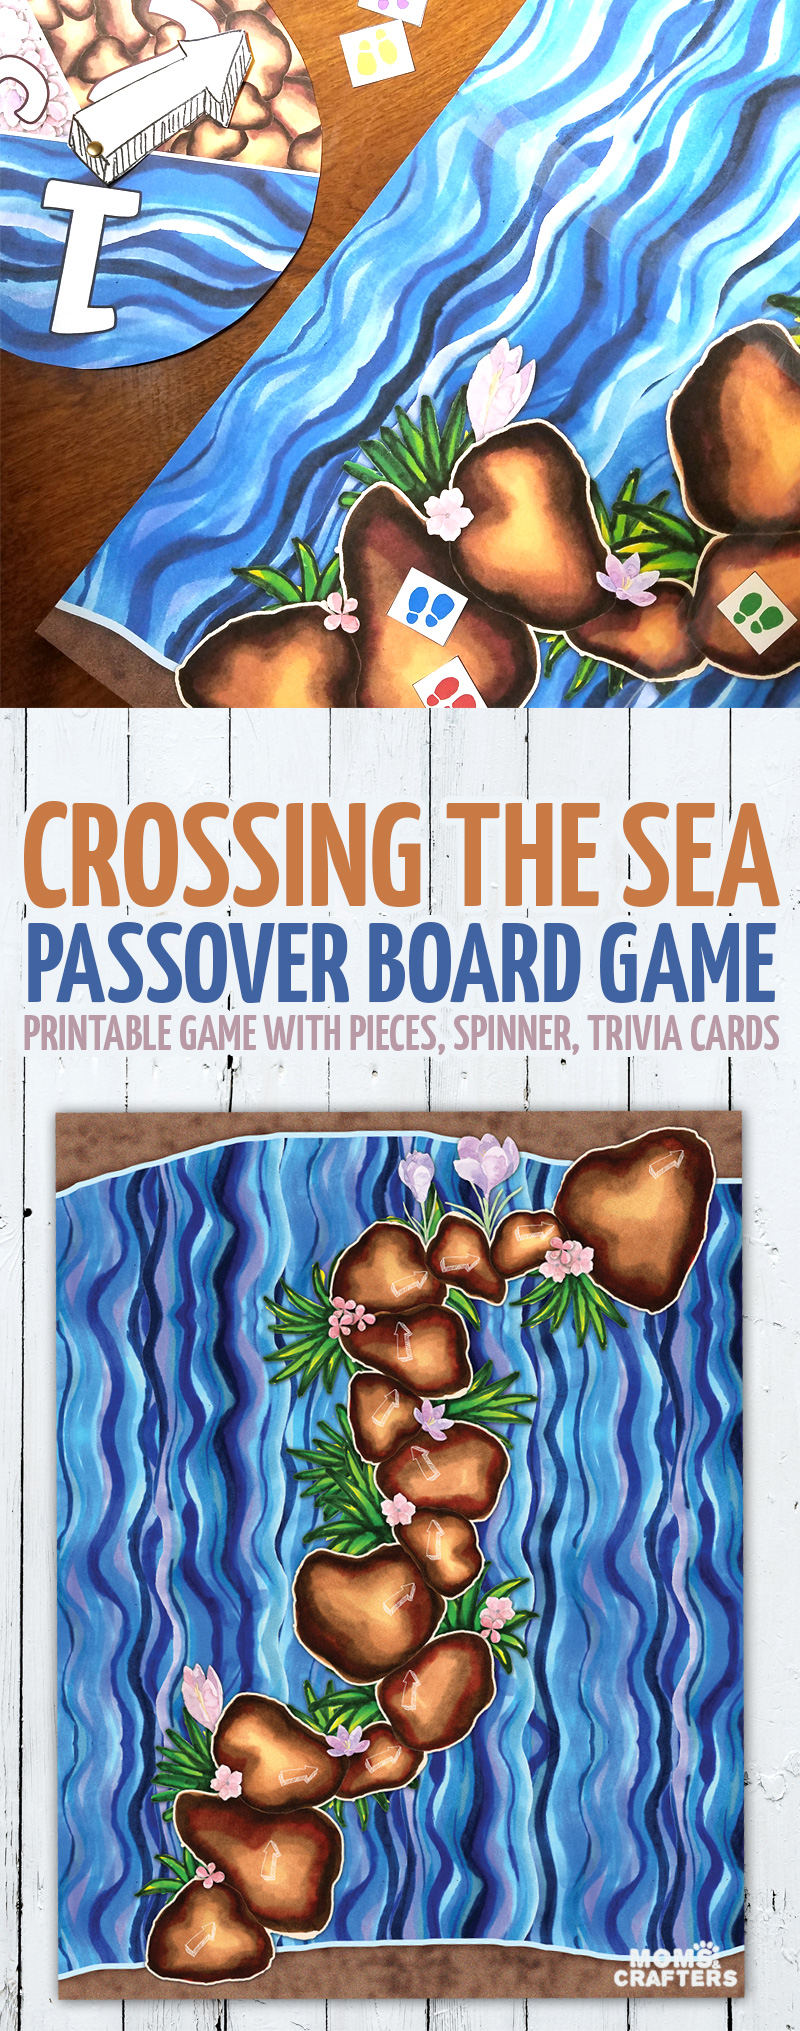 Cross the sea first in this beautiful hand-illustrated printable splitting the sea board game! This fun Passover game is focused on exodus and is a great Pesach Seder activity. It's geared toward preschool age children, but can be played as a family and on many levels. Includes Passover and Exodus trivia - or you can play it without the trivia as a Moana inspired game!